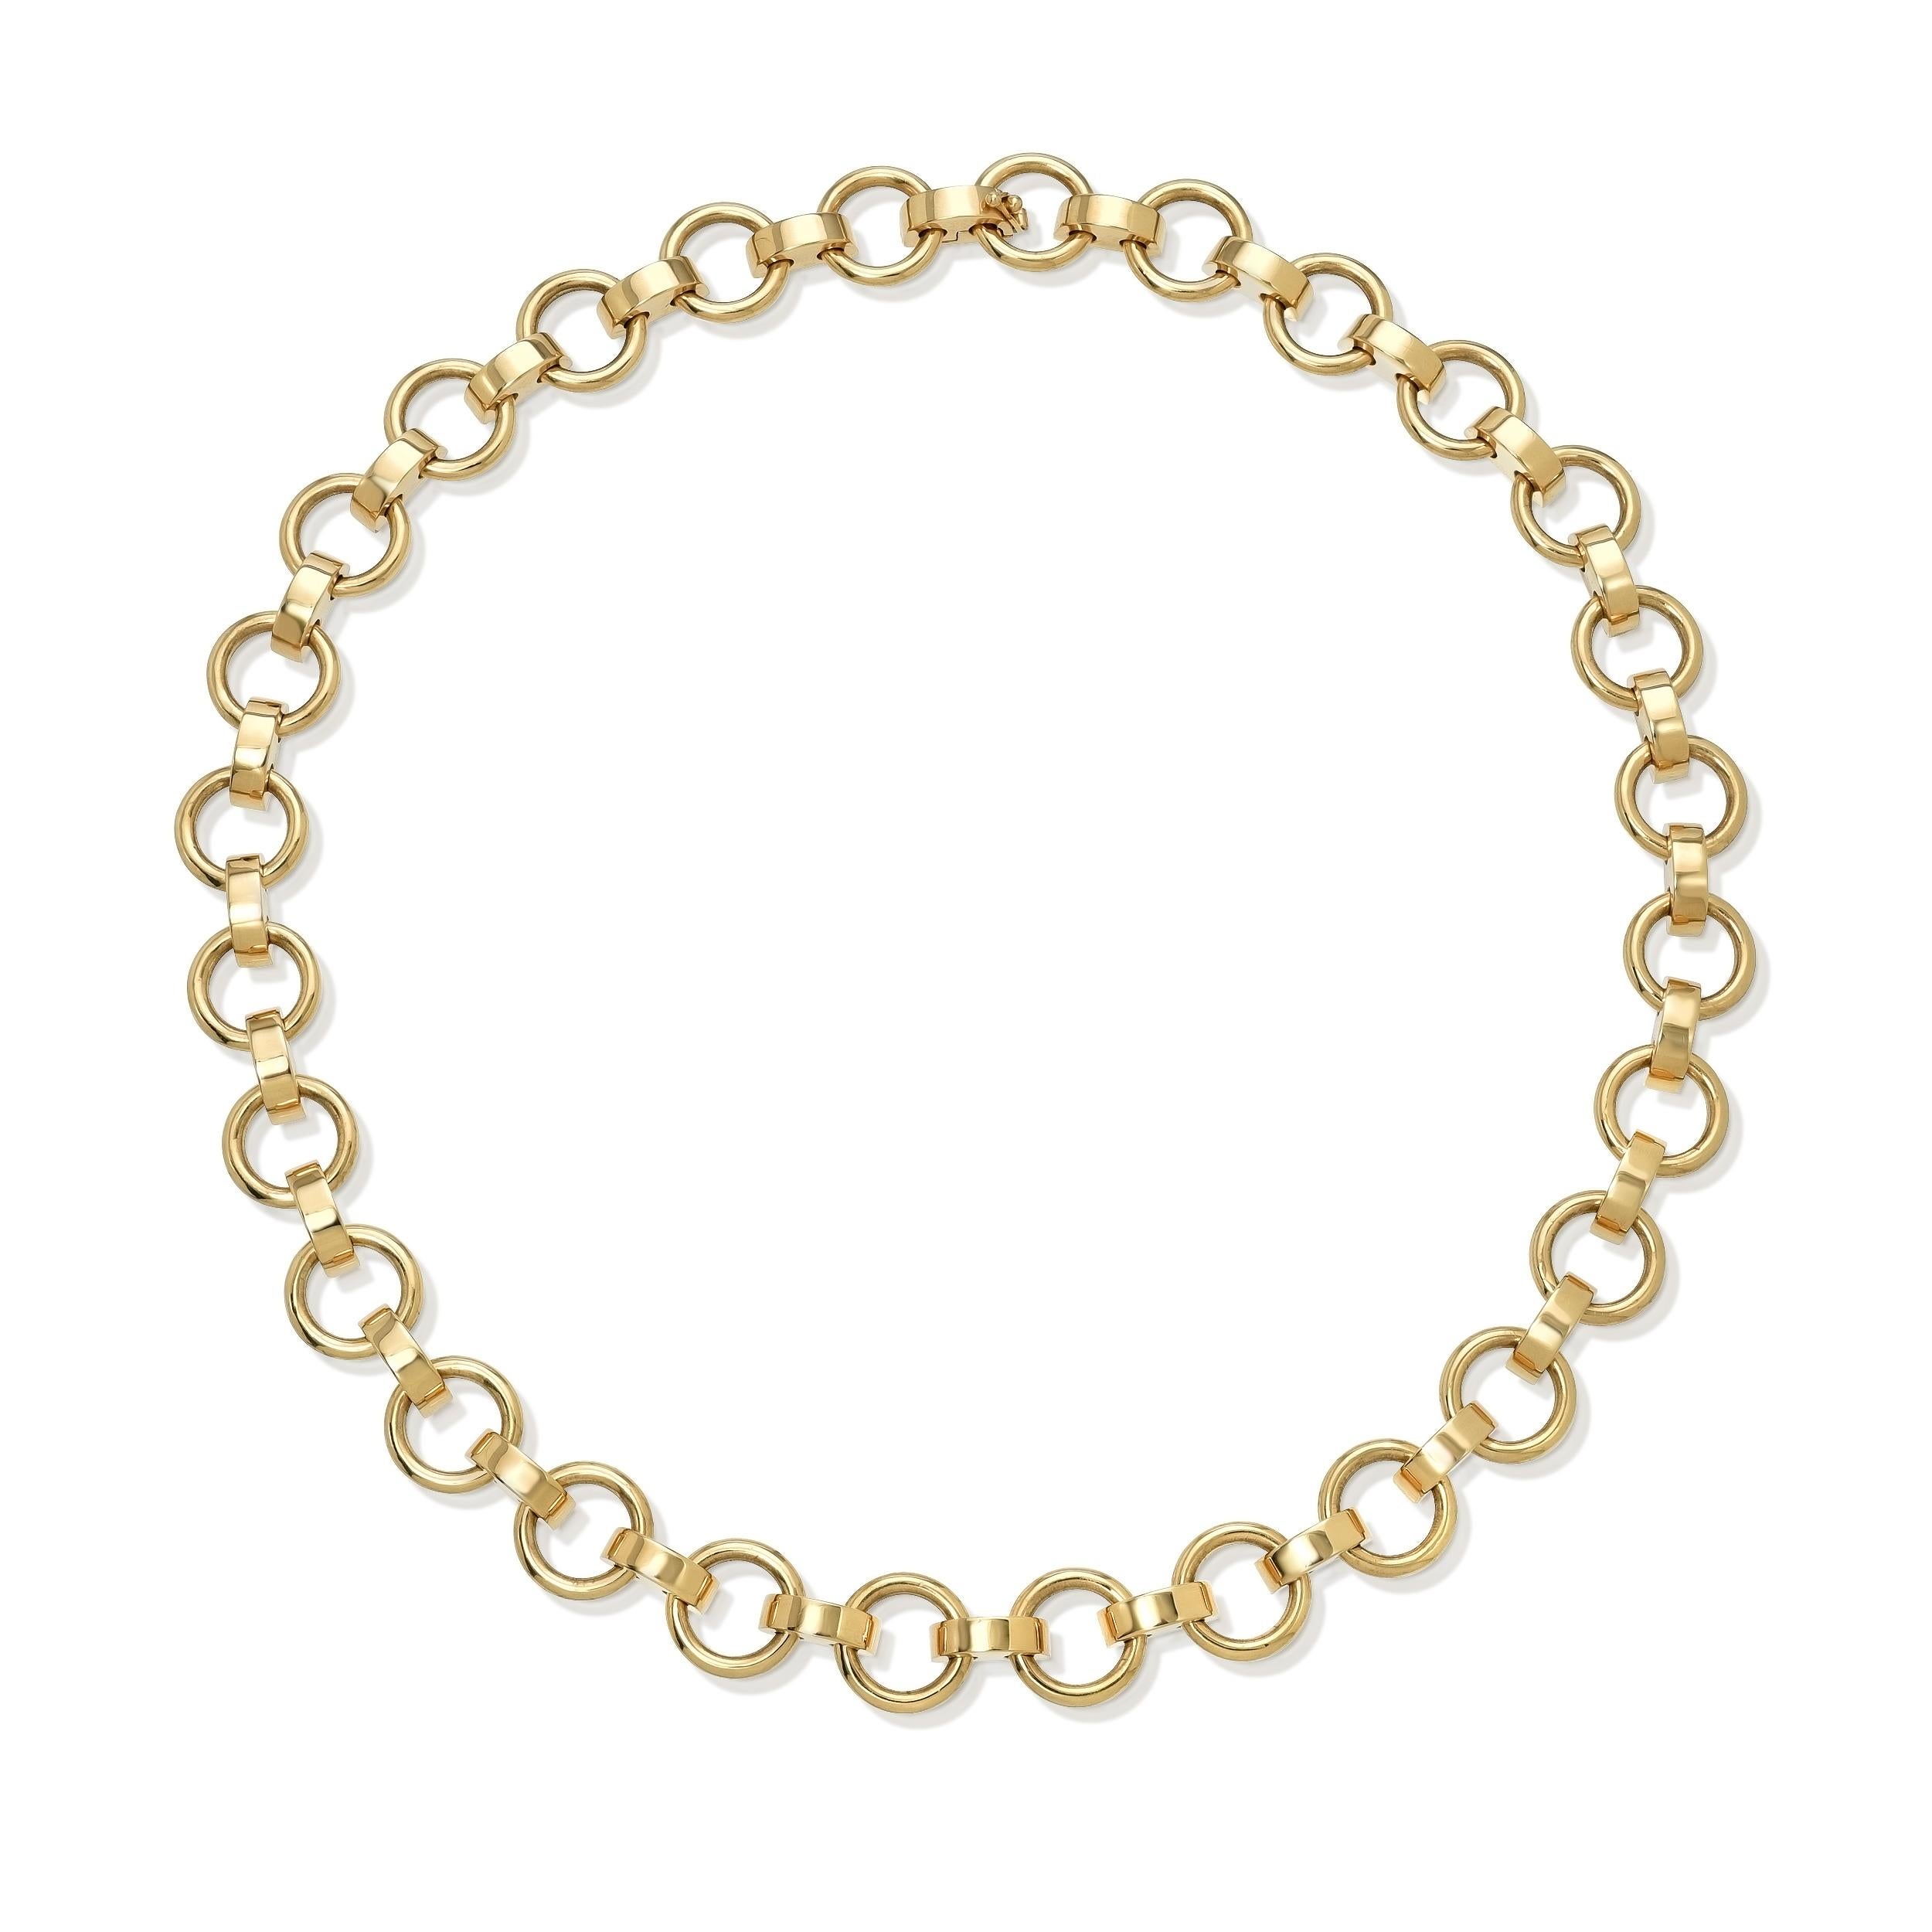 Handcrafted 18K gold round and saddle-shaped link necklace with hidden closure.

Necklace measures 17